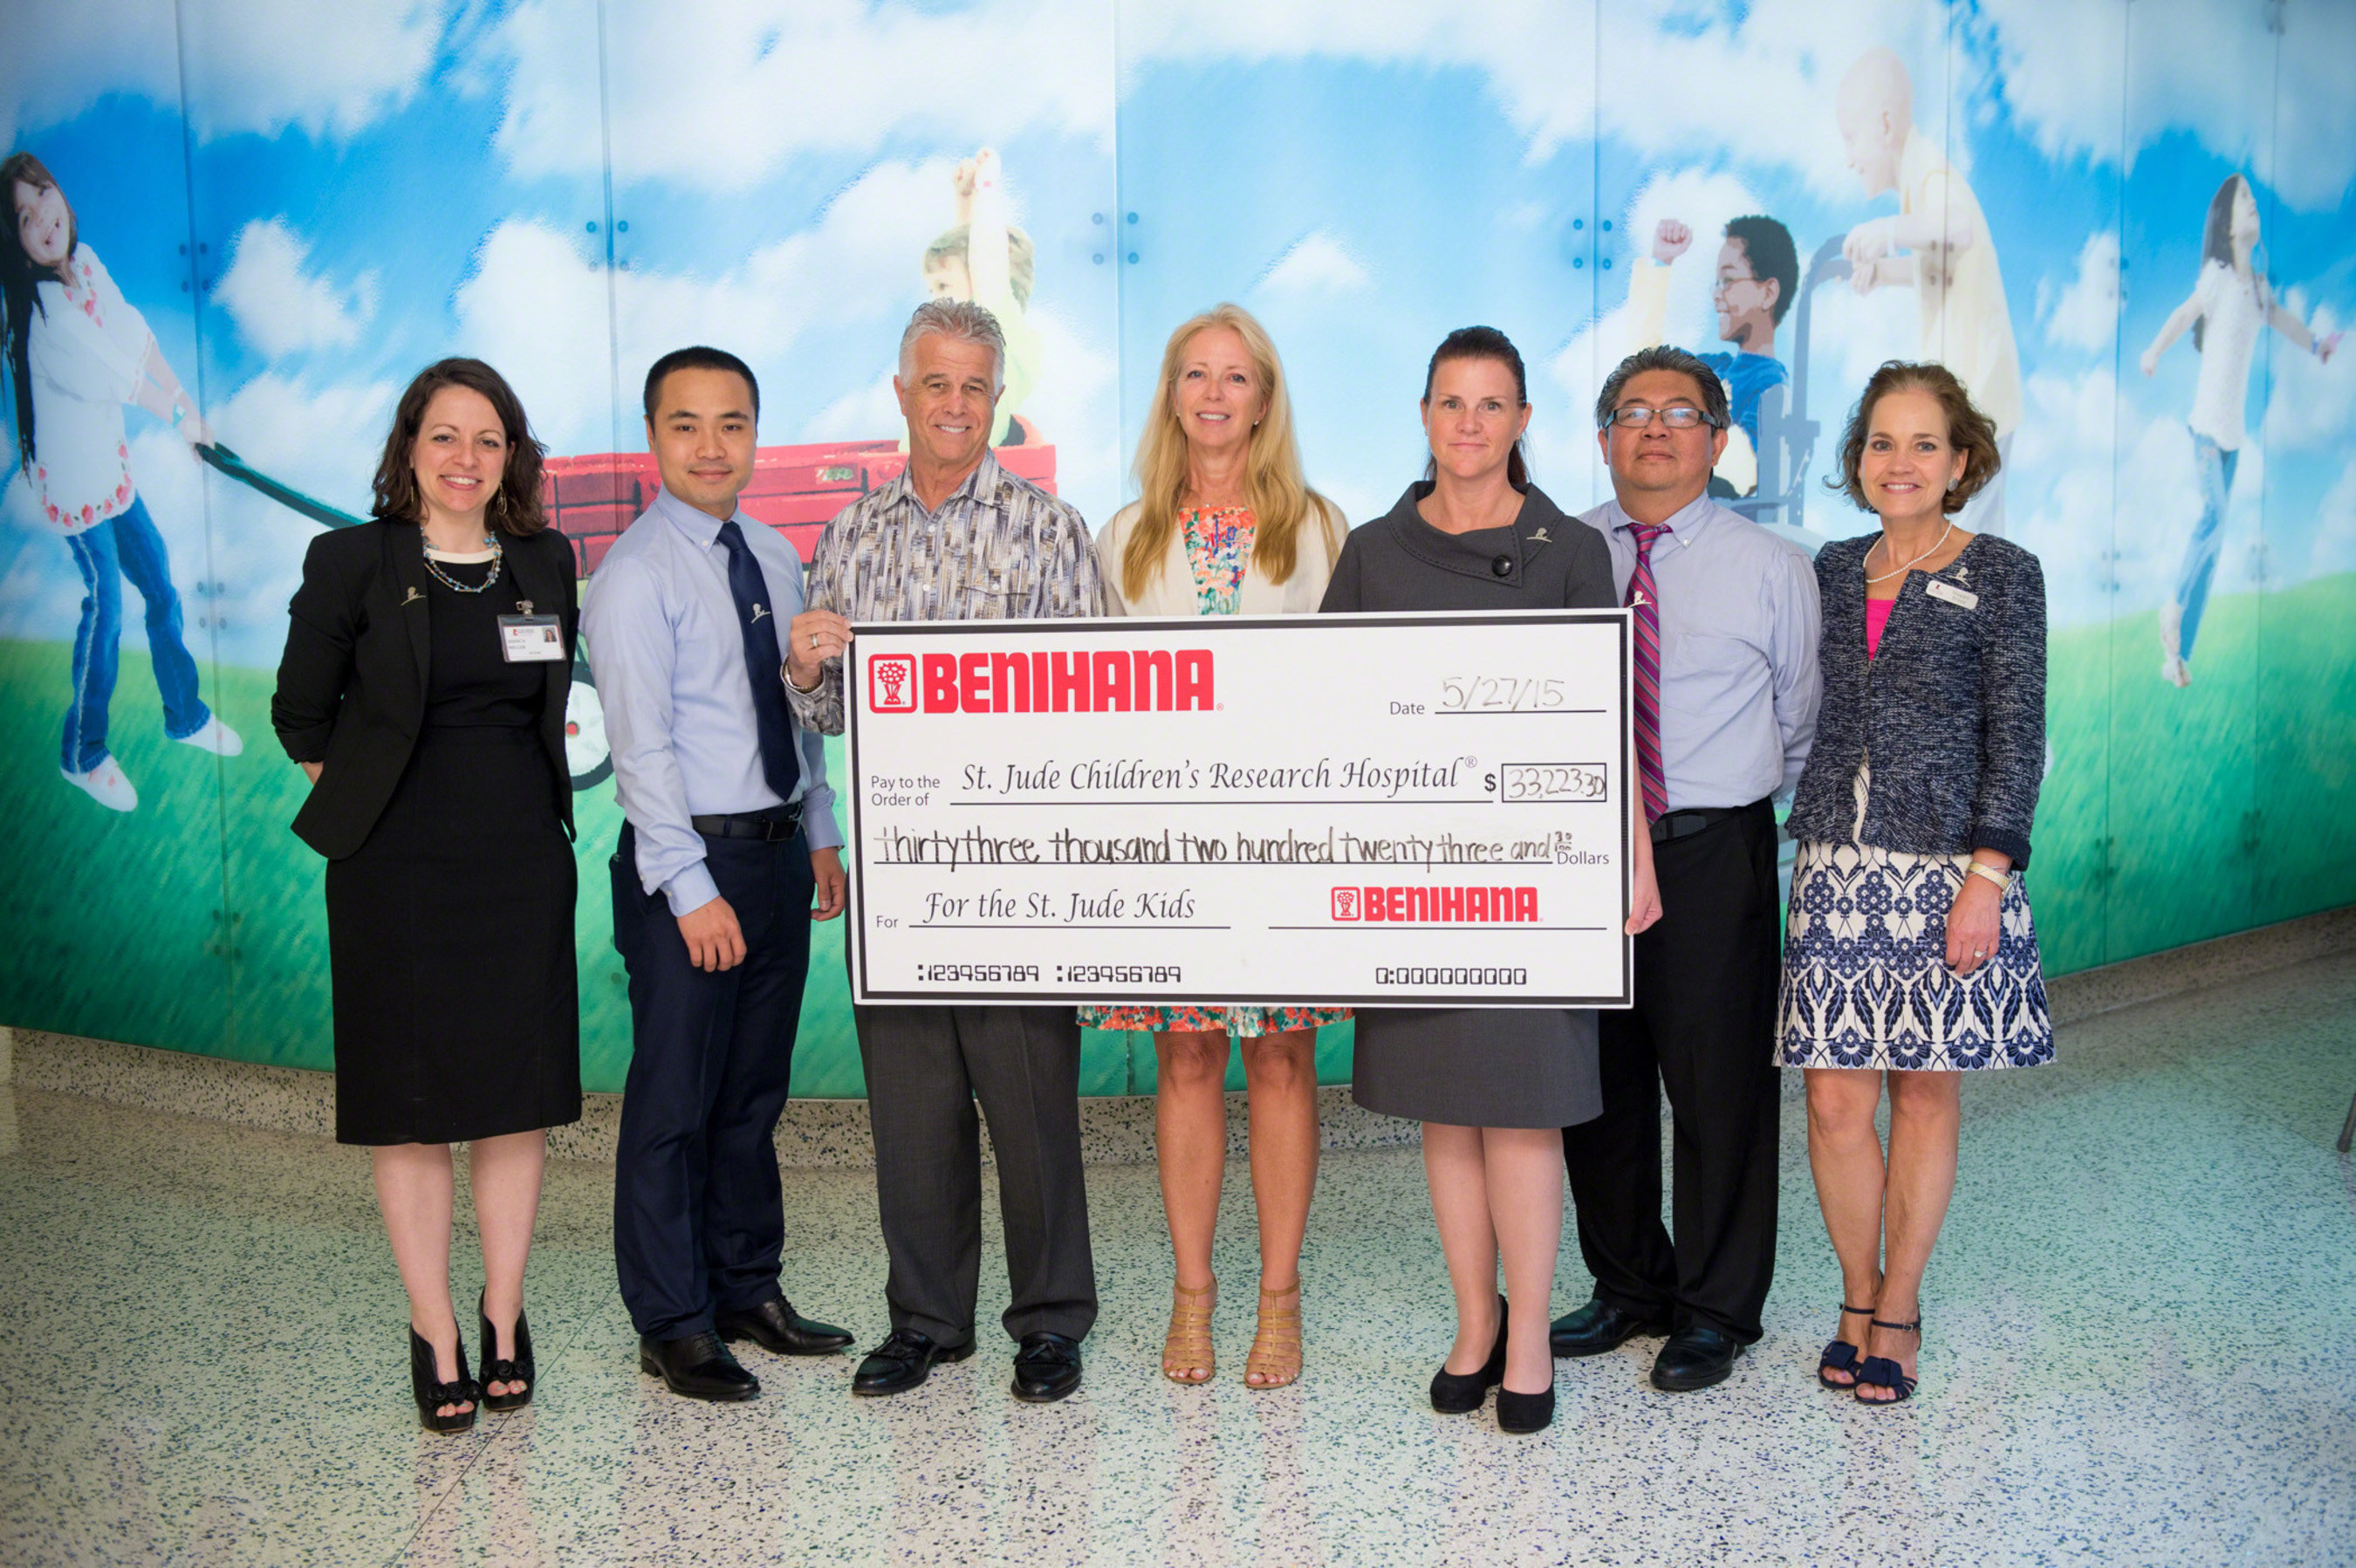 Benihana Inc. presented St. Jude Children's Research Hospital(R) with a donation of more than $33,000 on May 27. The contribution was made possible through funds raised by the 2015 "Children Helping Children" coloring contest, part of the Children's Day program that culminated May 5.